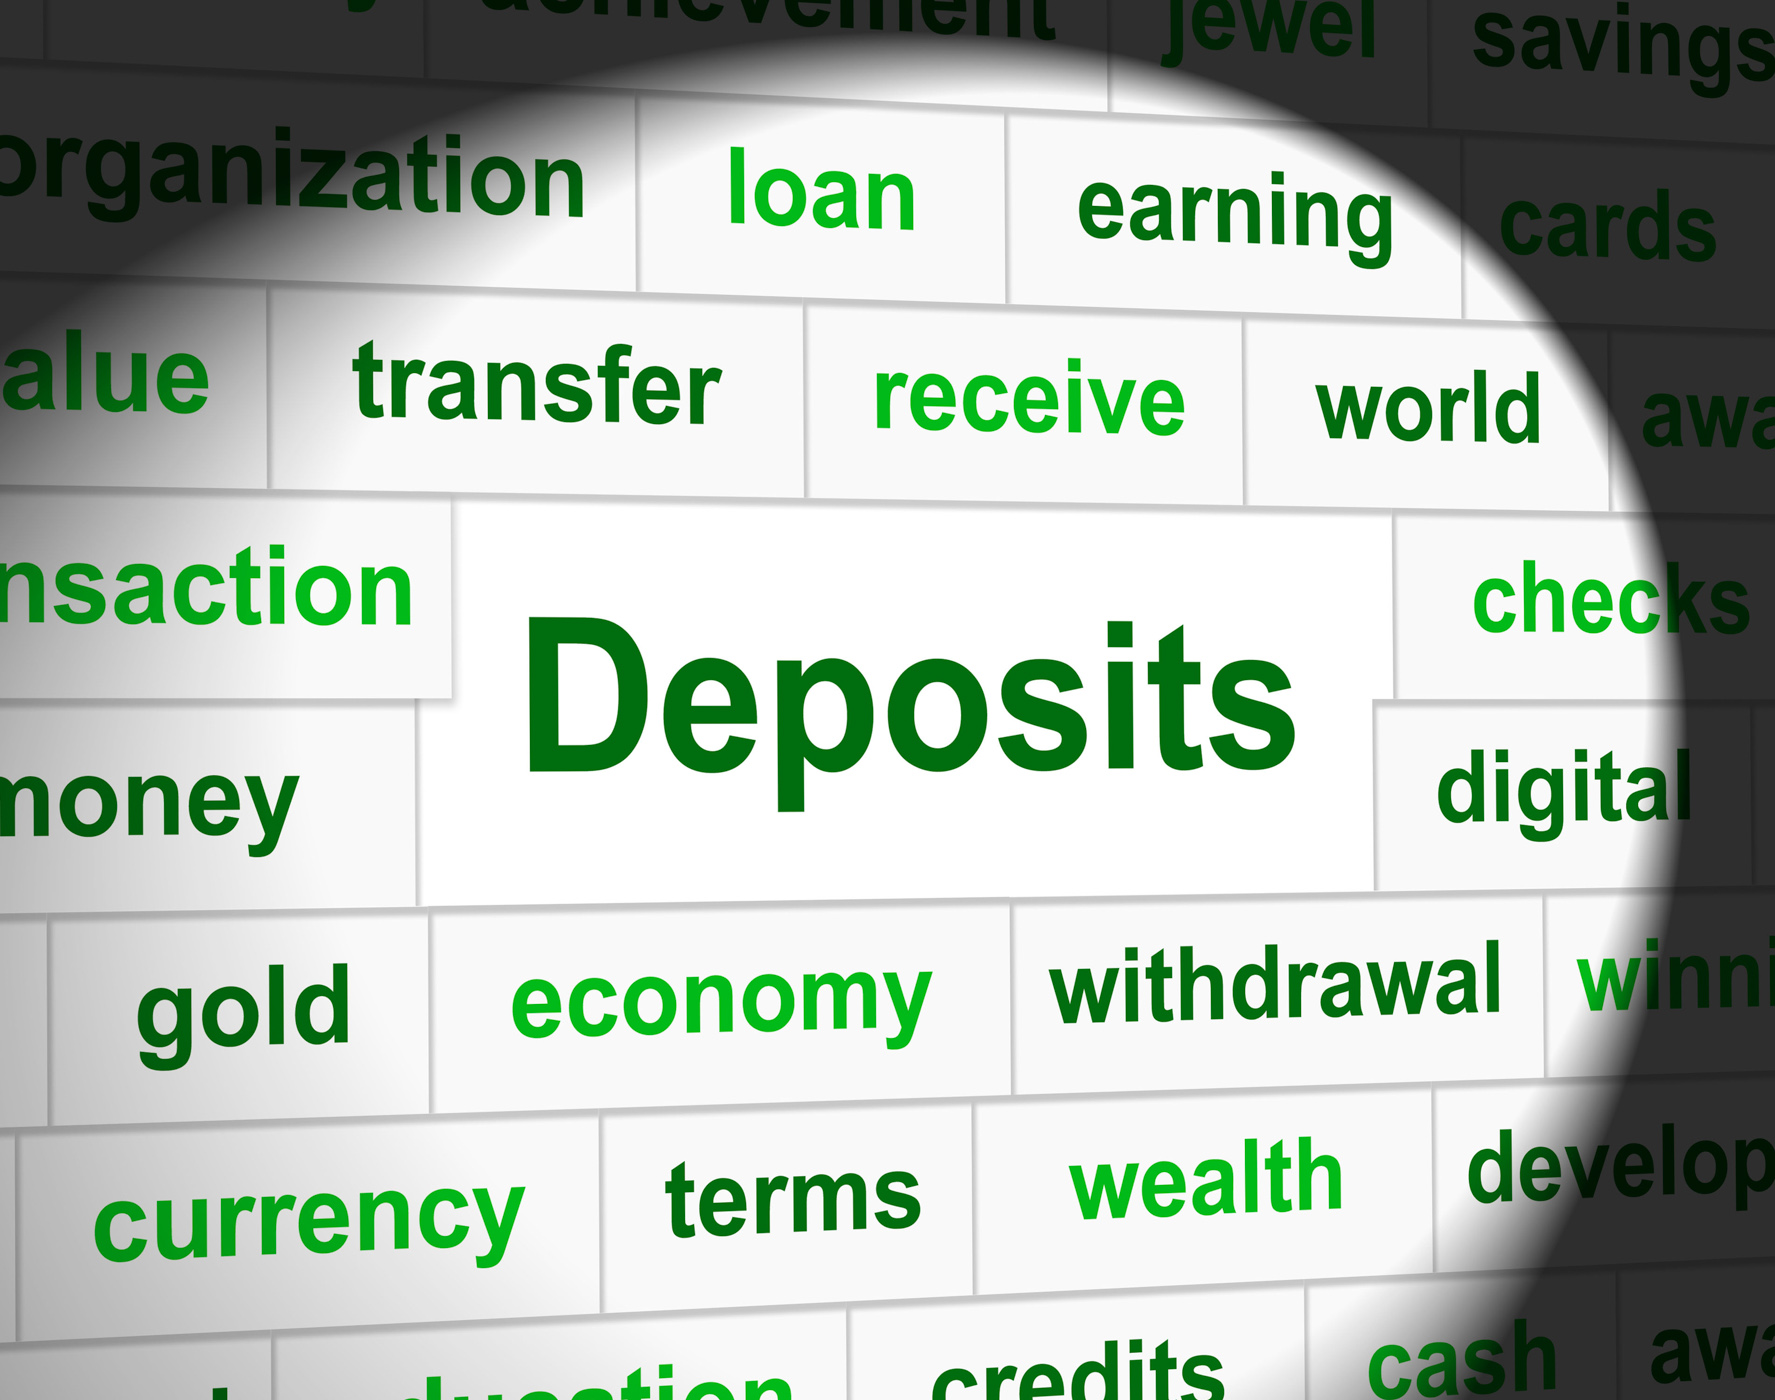 Deposit deposits represents part payment and business photo